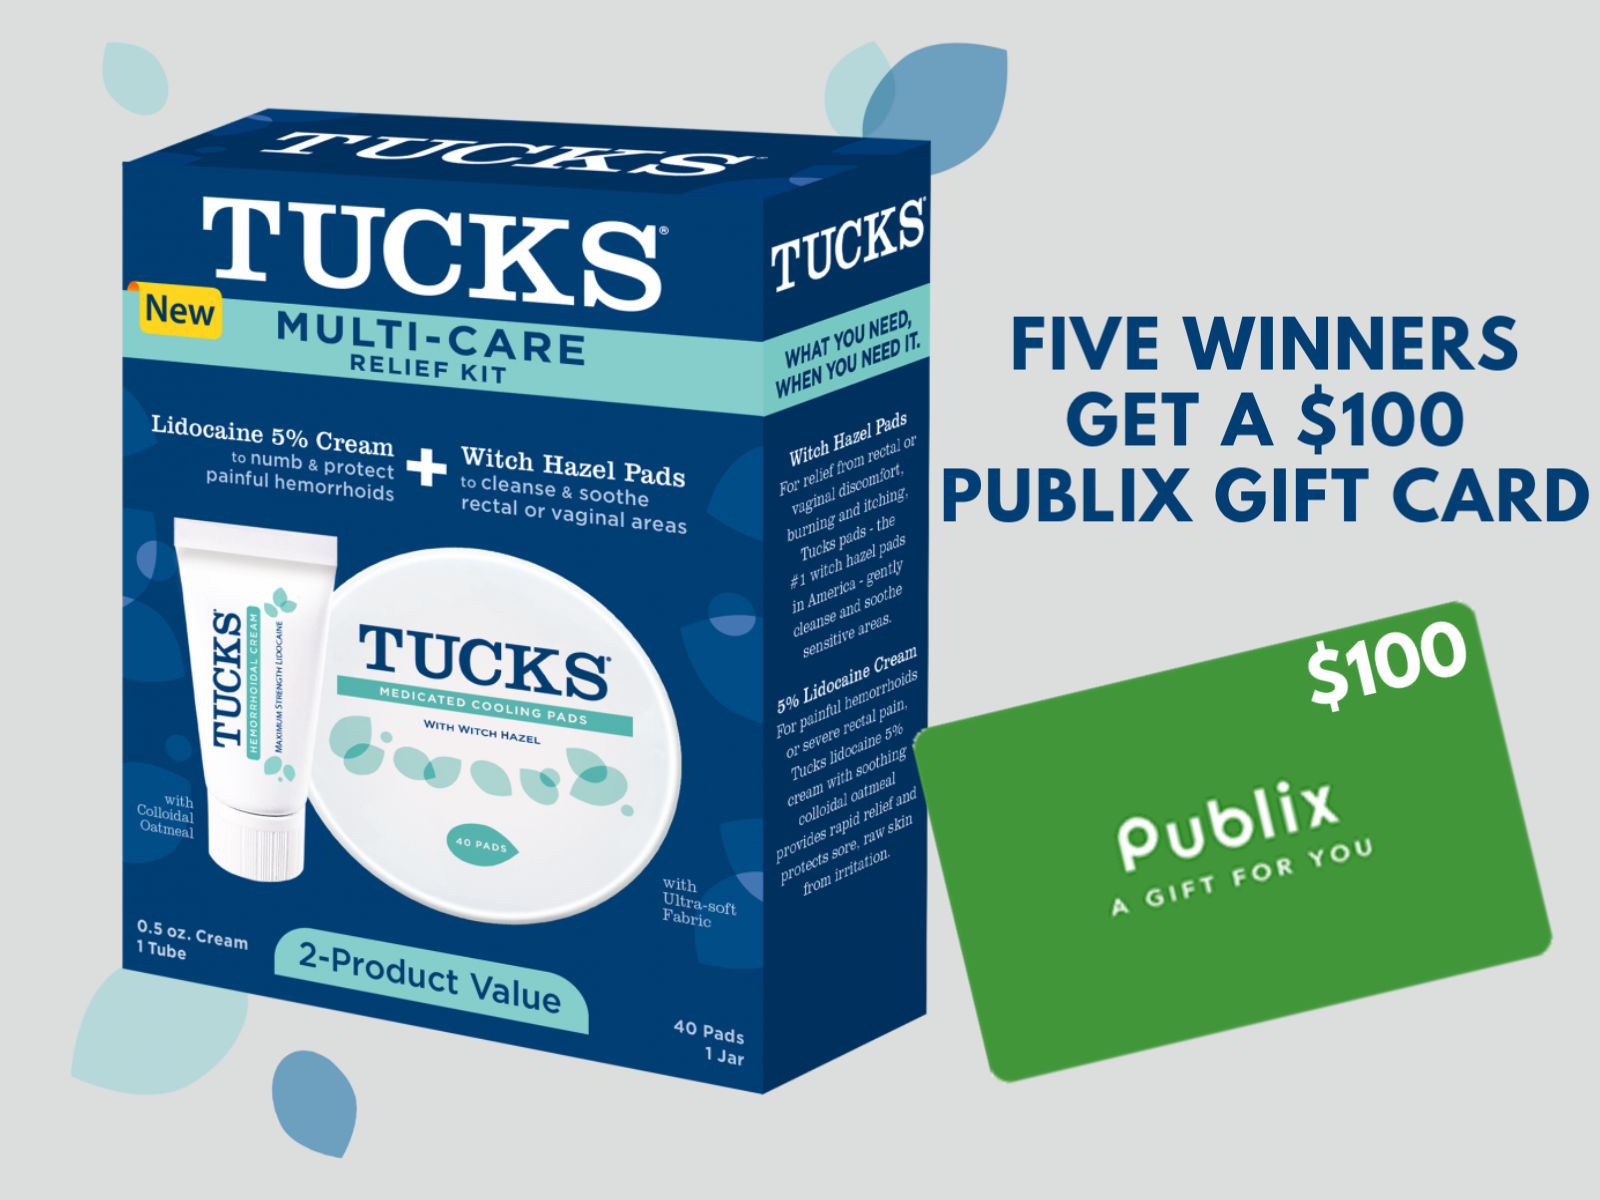 Try New Tucks Multi-Care Relief AND Be Sure To Enter My Giveaway For A Chance To Win A $100 Publix Gift Card!